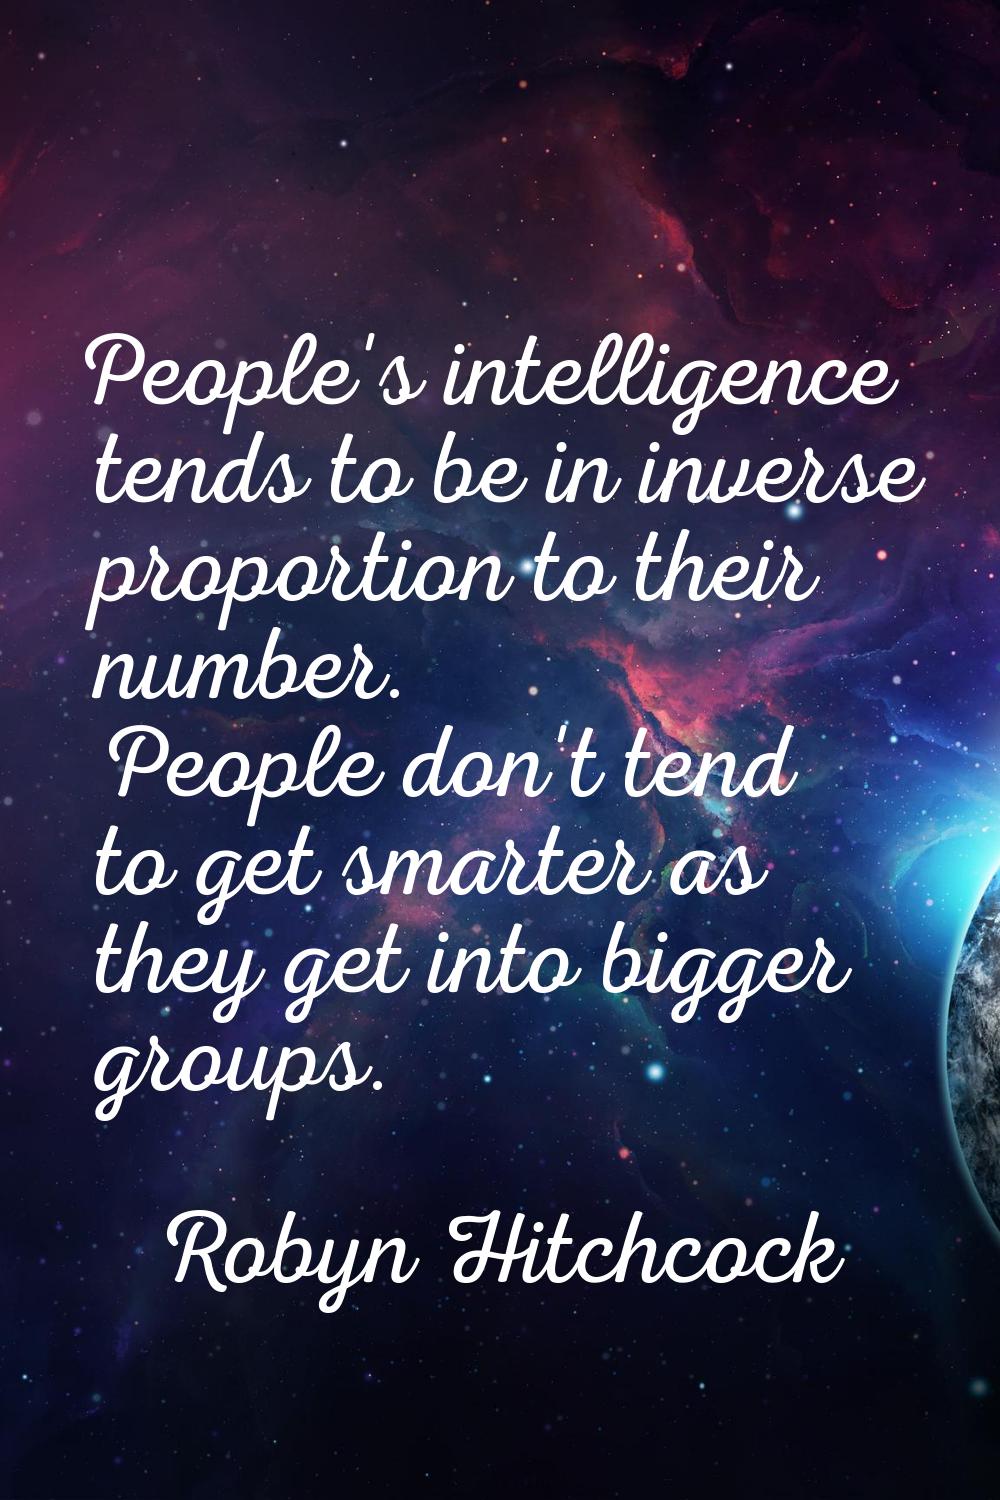 People's intelligence tends to be in inverse proportion to their number. People don't tend to get s